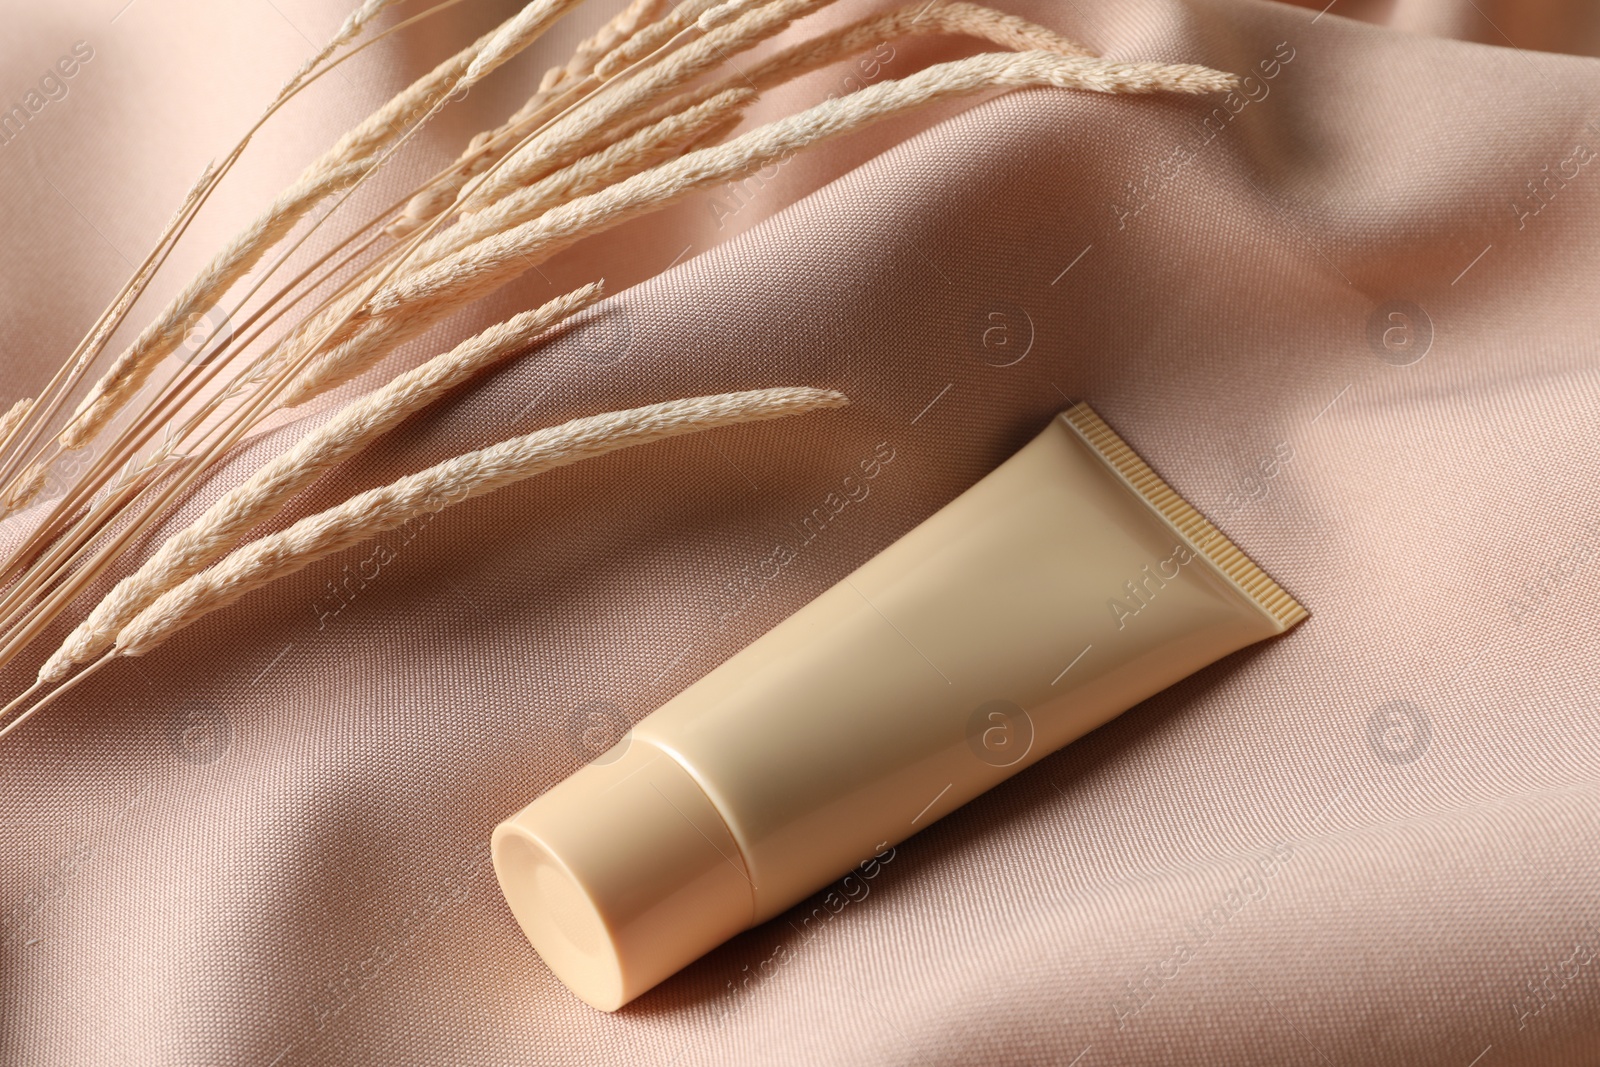 Photo of Tube of skin foundation and decorative plants on beige fabric. Makeup product